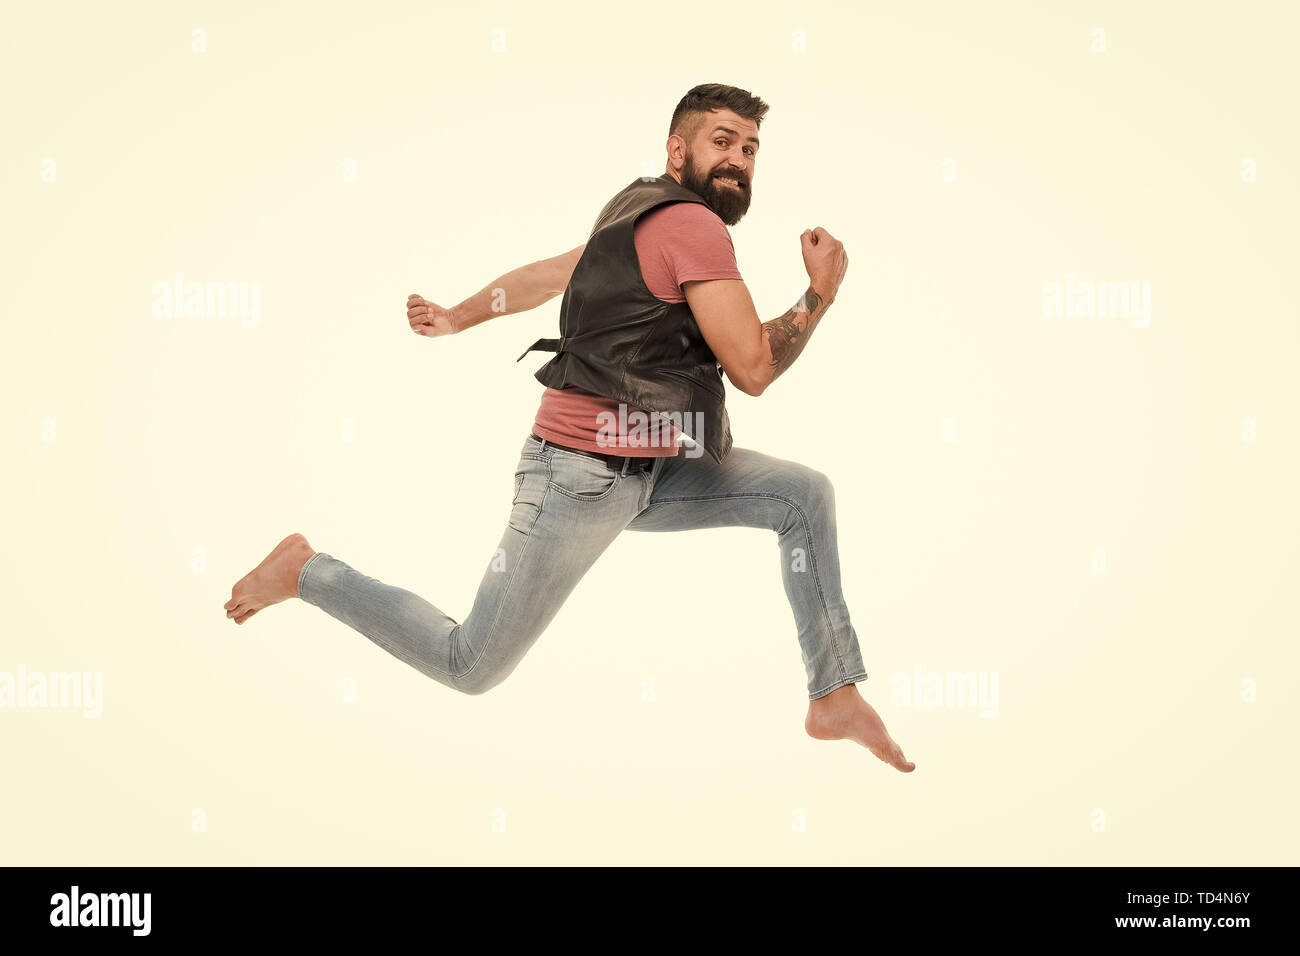 Never stop. Man thief run away. Keep moving concept. Guy bearded hipster captured in running motion isolated on white background. Bearded man running high speed. Escape and runaway. Running motion. Stock Photo